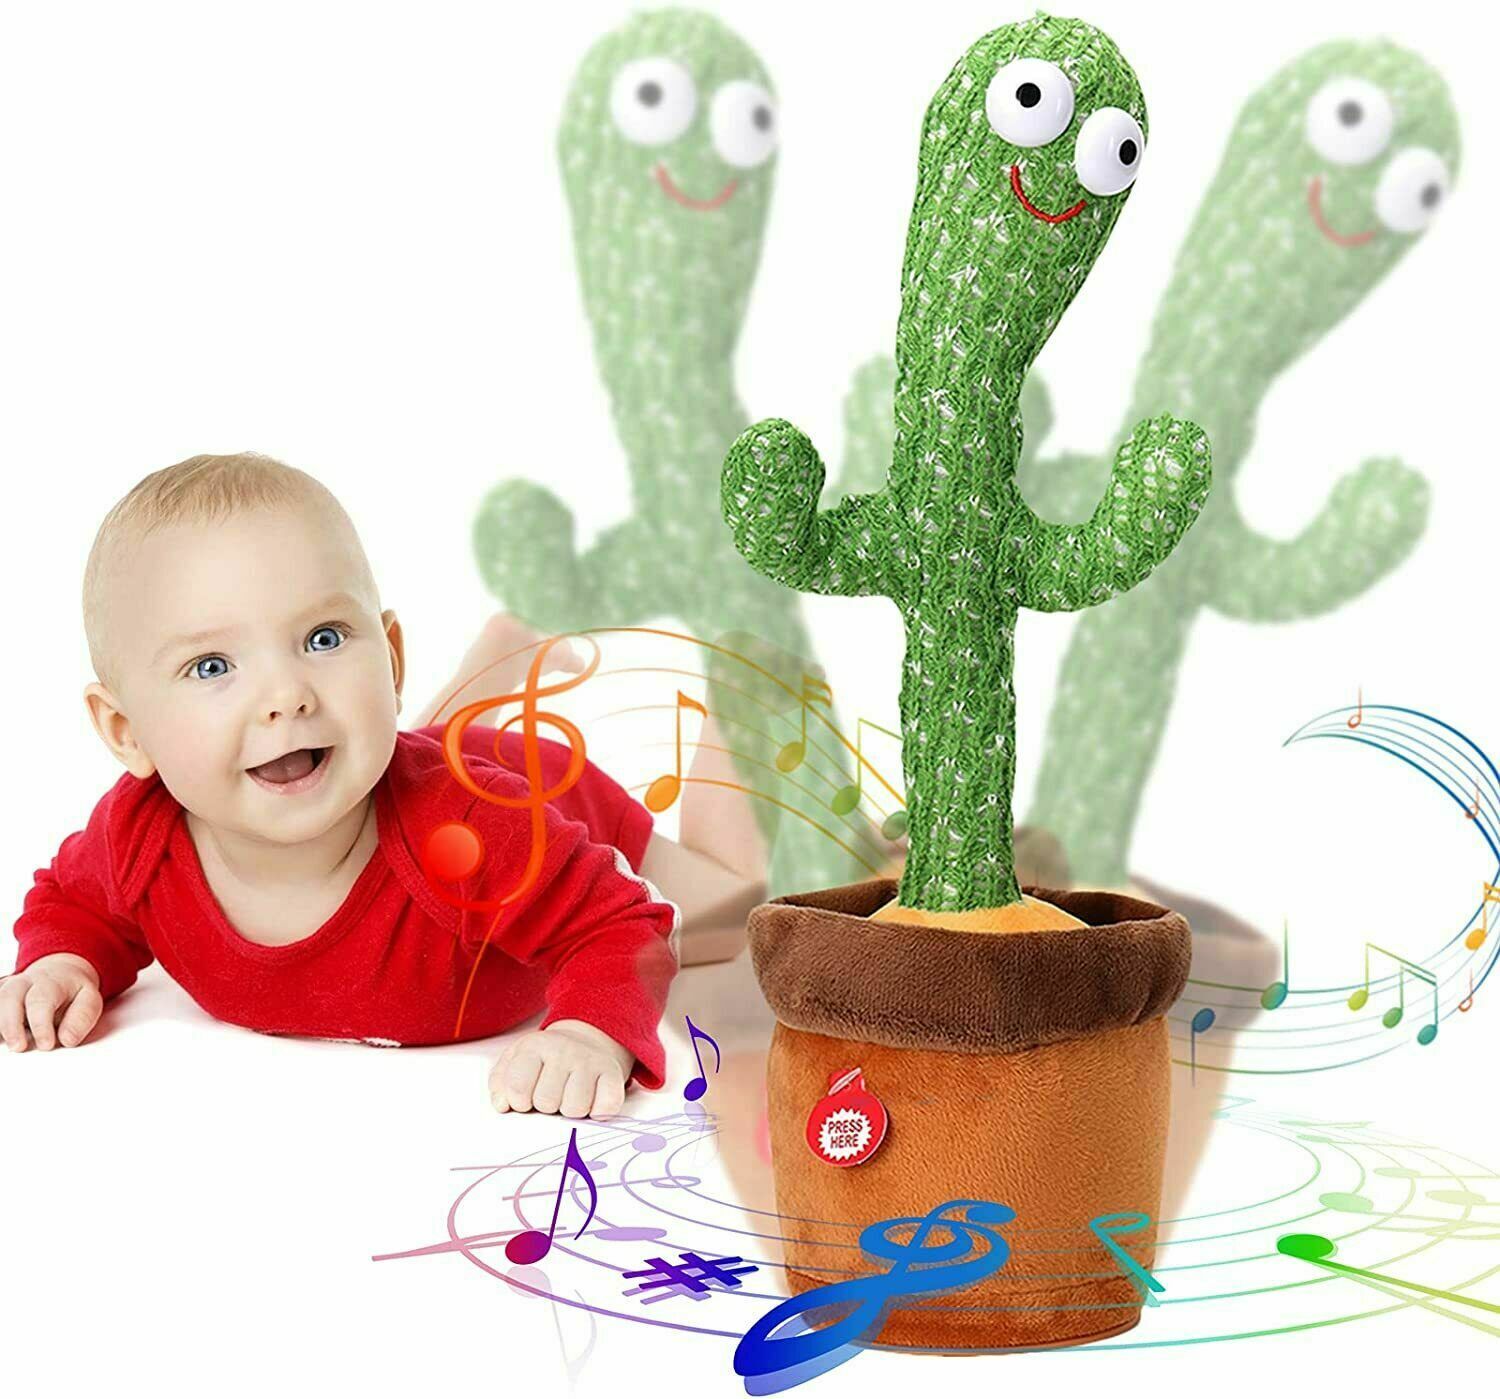 Cat Plushies Dancing Cactus: Sing, Wriggle & Repeat for All Ages